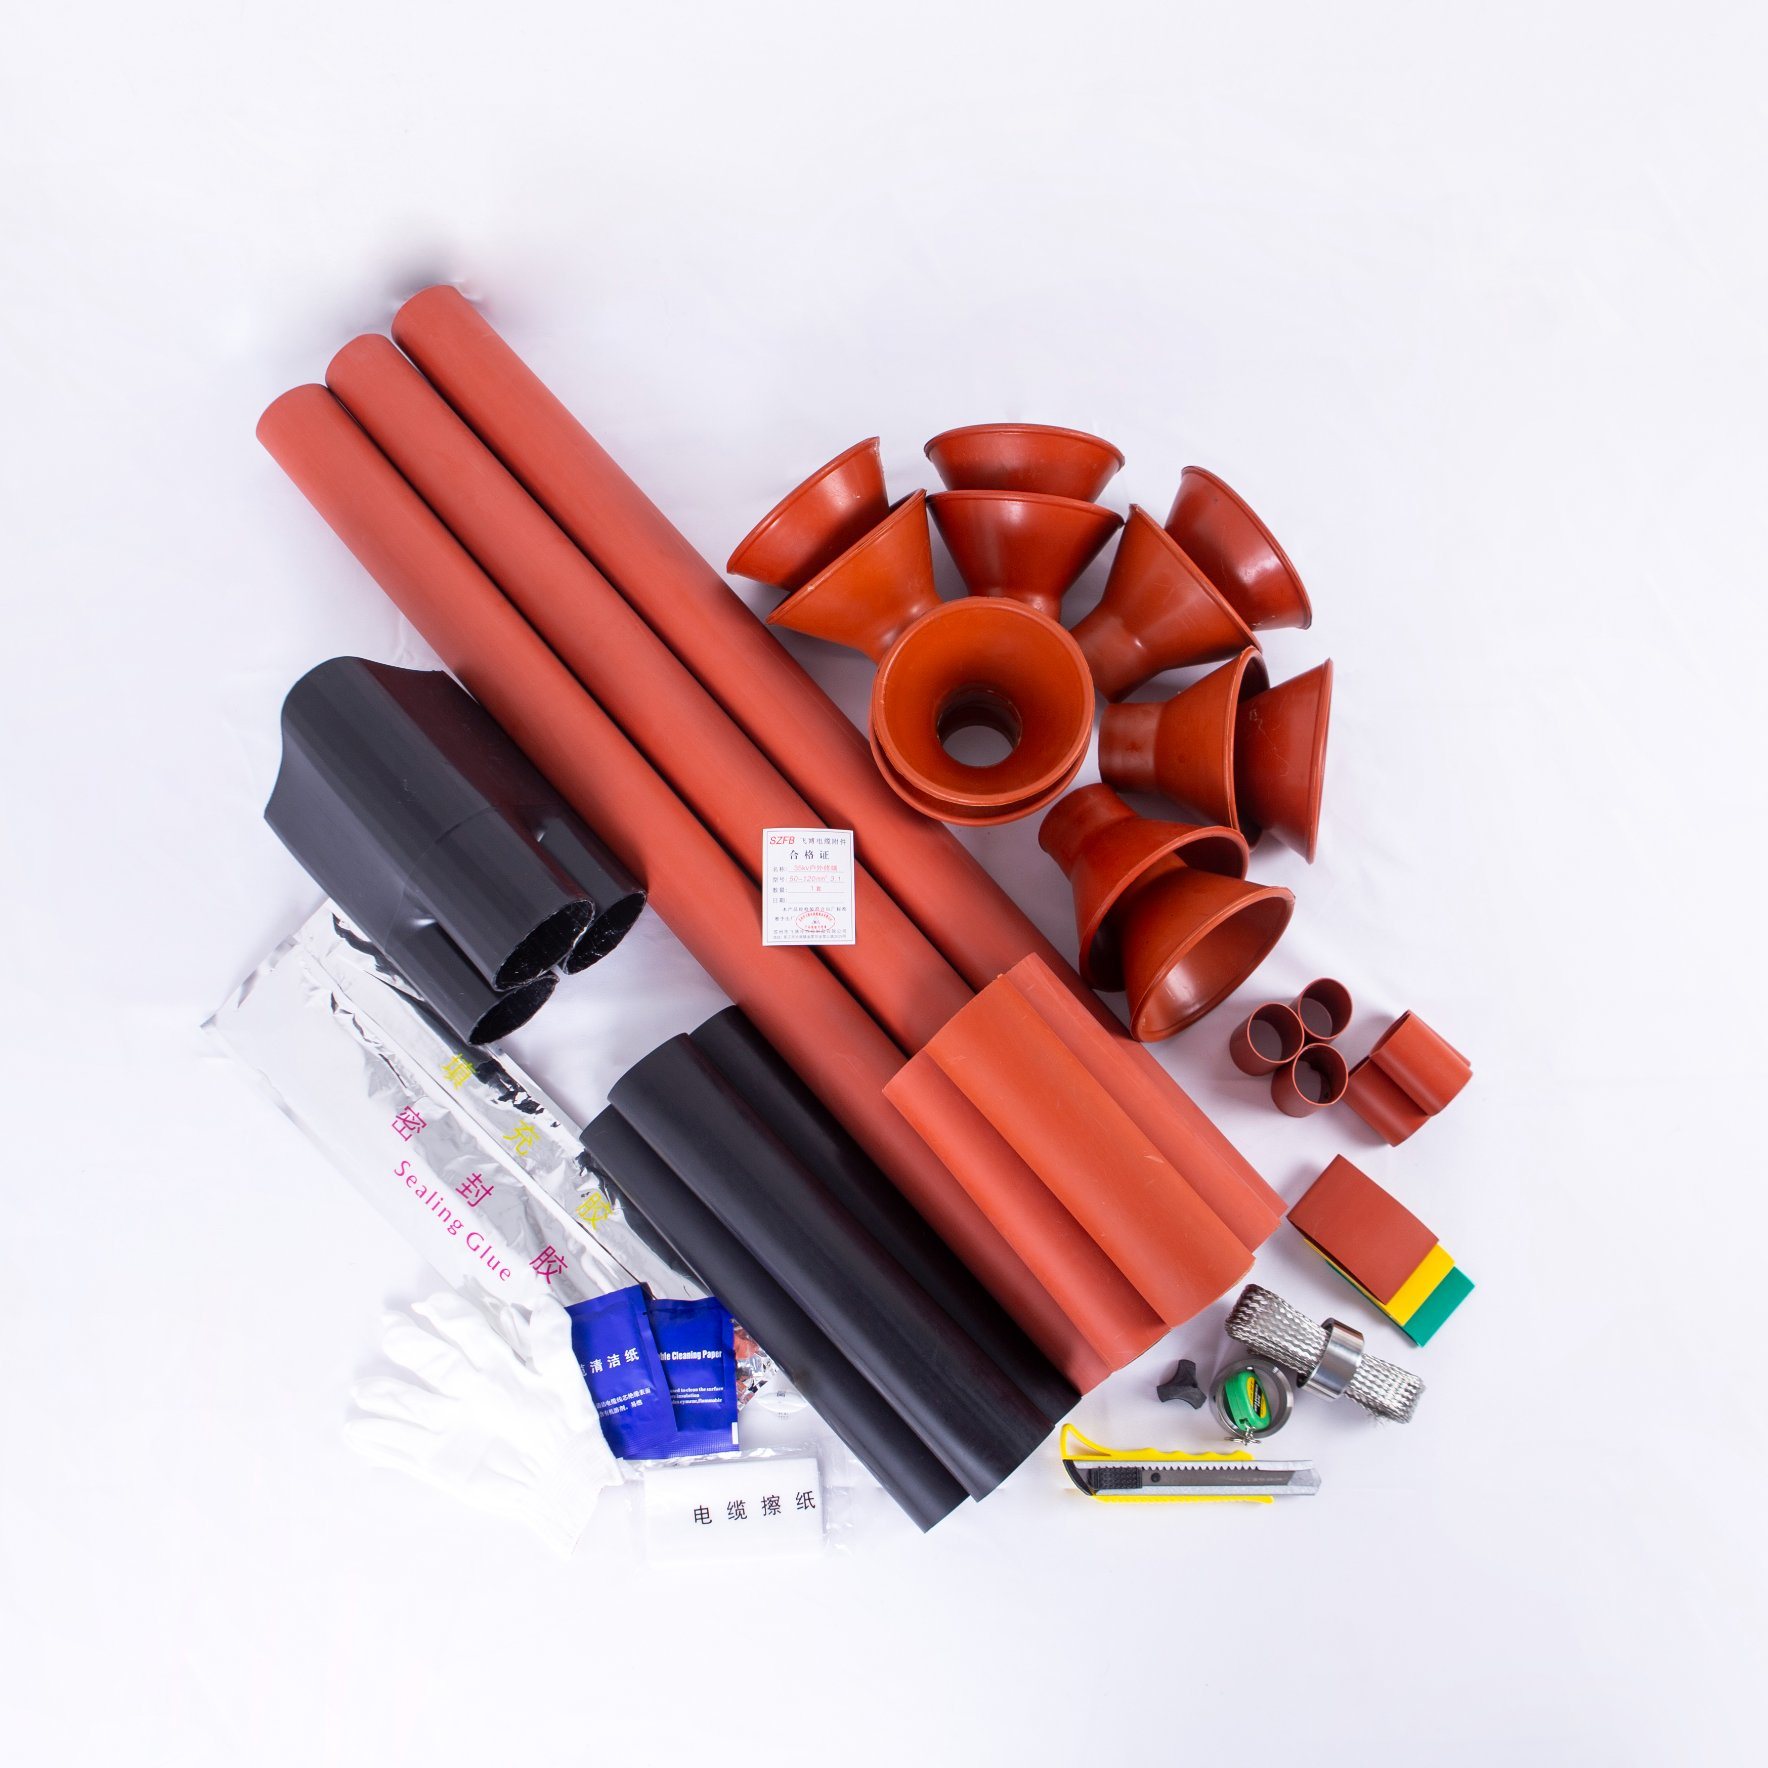 33kv Heat Shrinkable Type Outdoor Termination Kit Cable Accessory